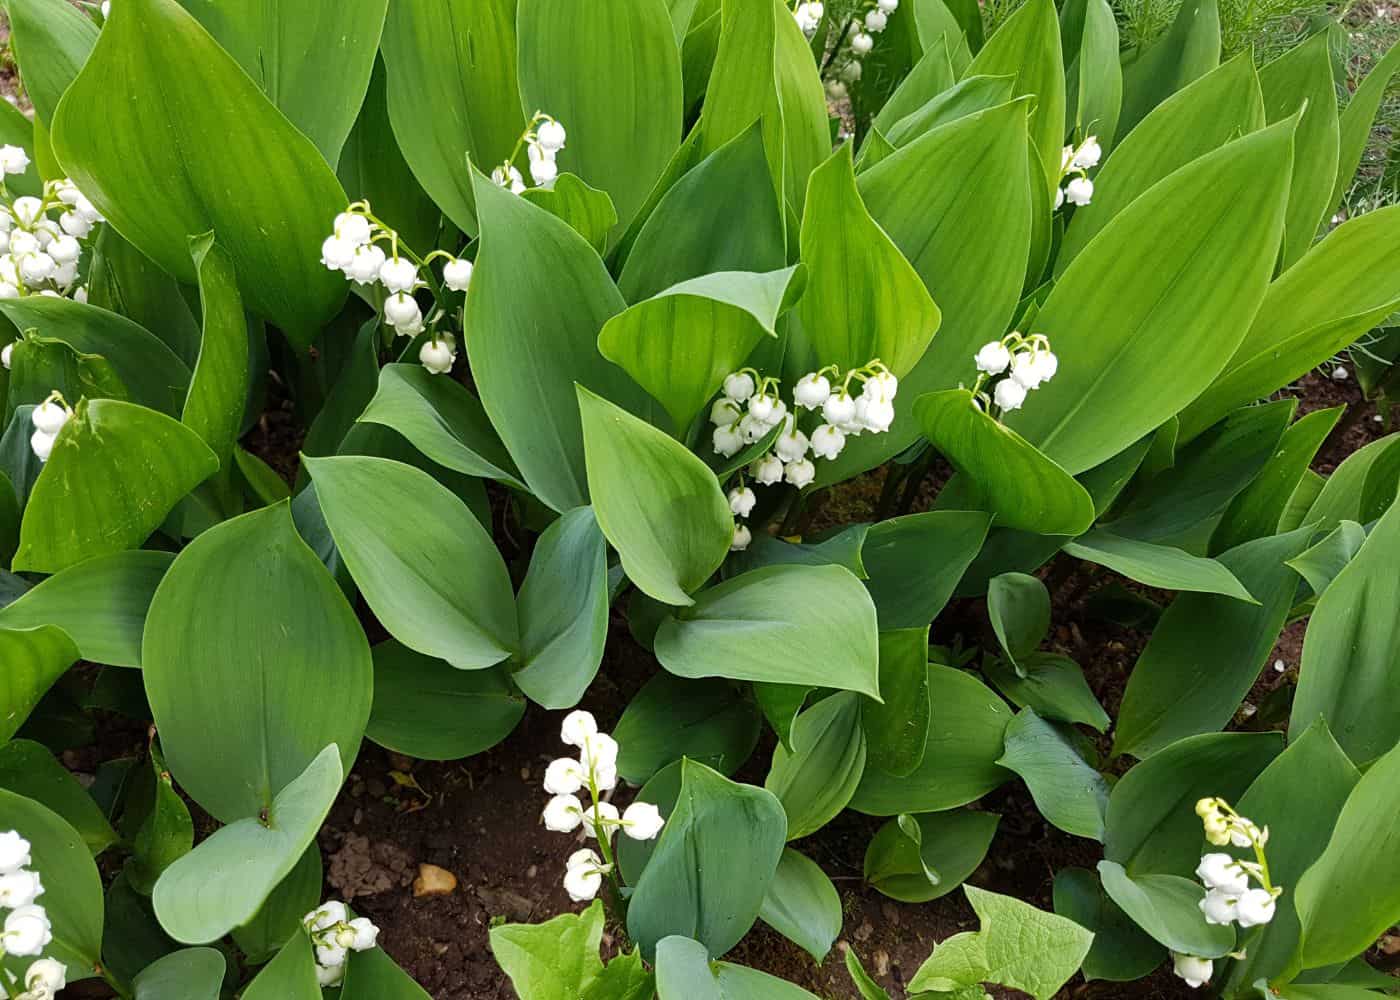 Groundcover - lily of the valley